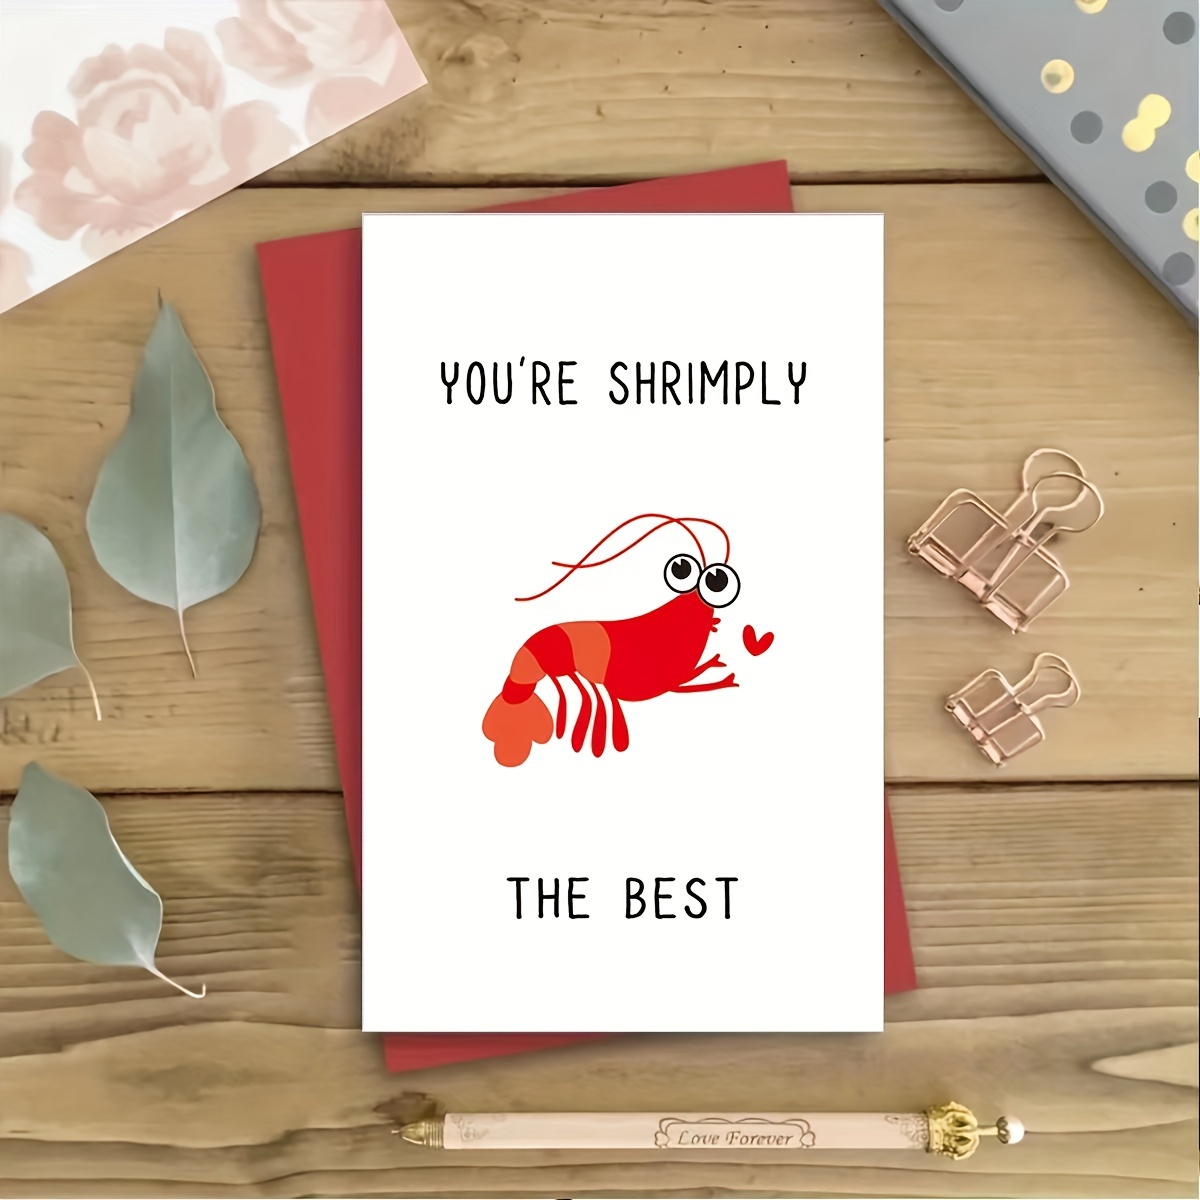 

1pc, Fun Lobster Cards, Gift Cards, You Are The Best "shrimp" Cheer Cards, Gifts For Him, Her, Colleagues, Family, Friends On Special Days, Birthday Cards